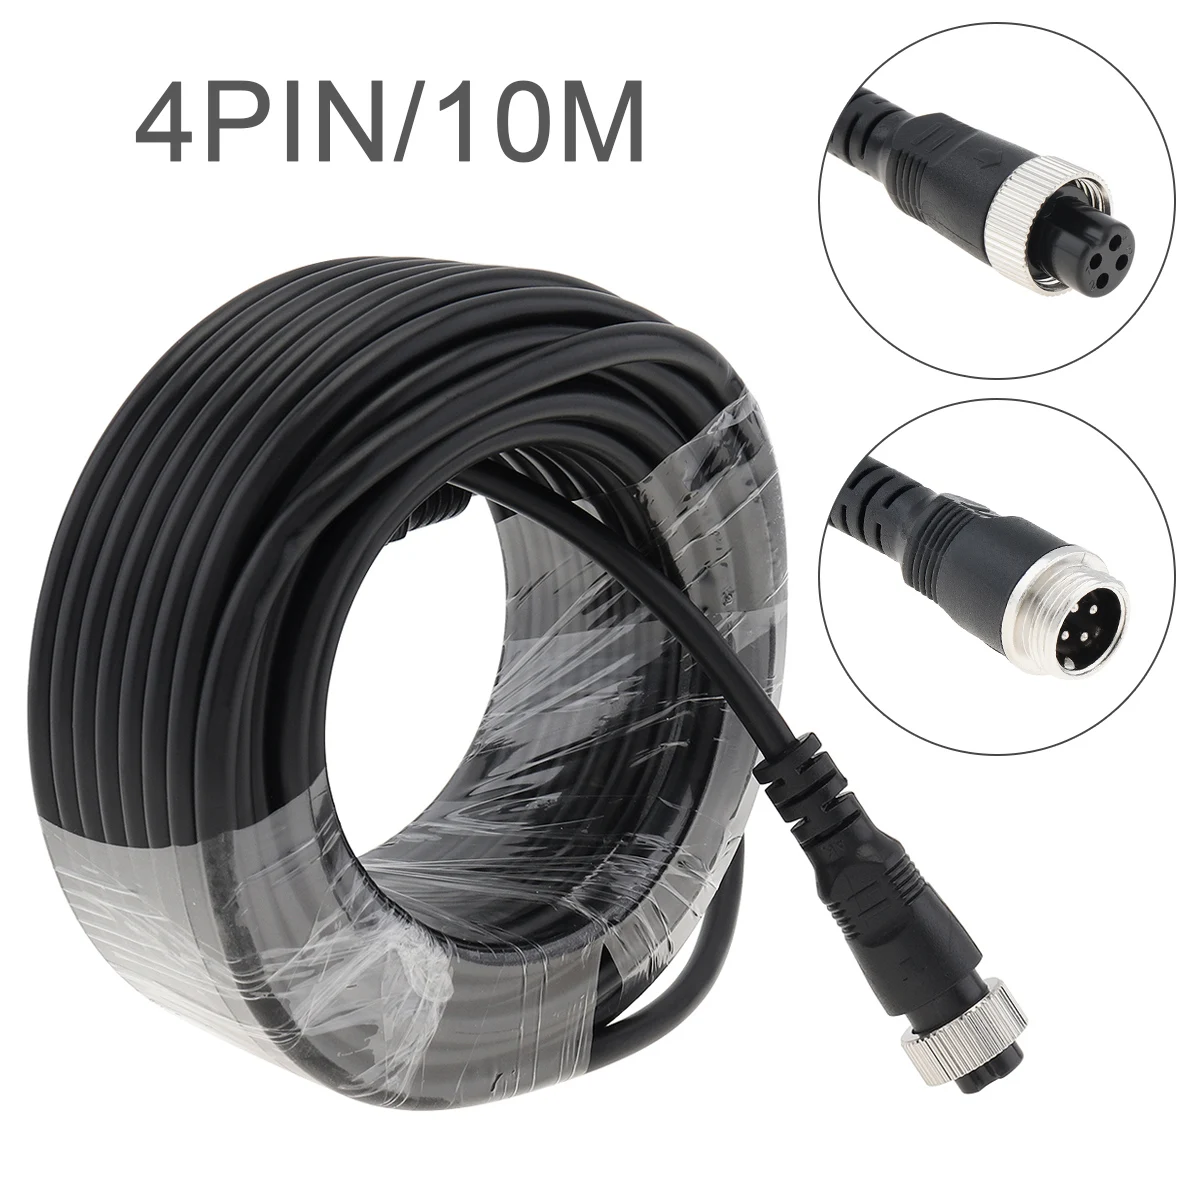 

4 Pin 10M Connector Plug Power AV Video Extension Cable for Car Truck BUS Caravans Motor home Reverse Parking Camera Monitor